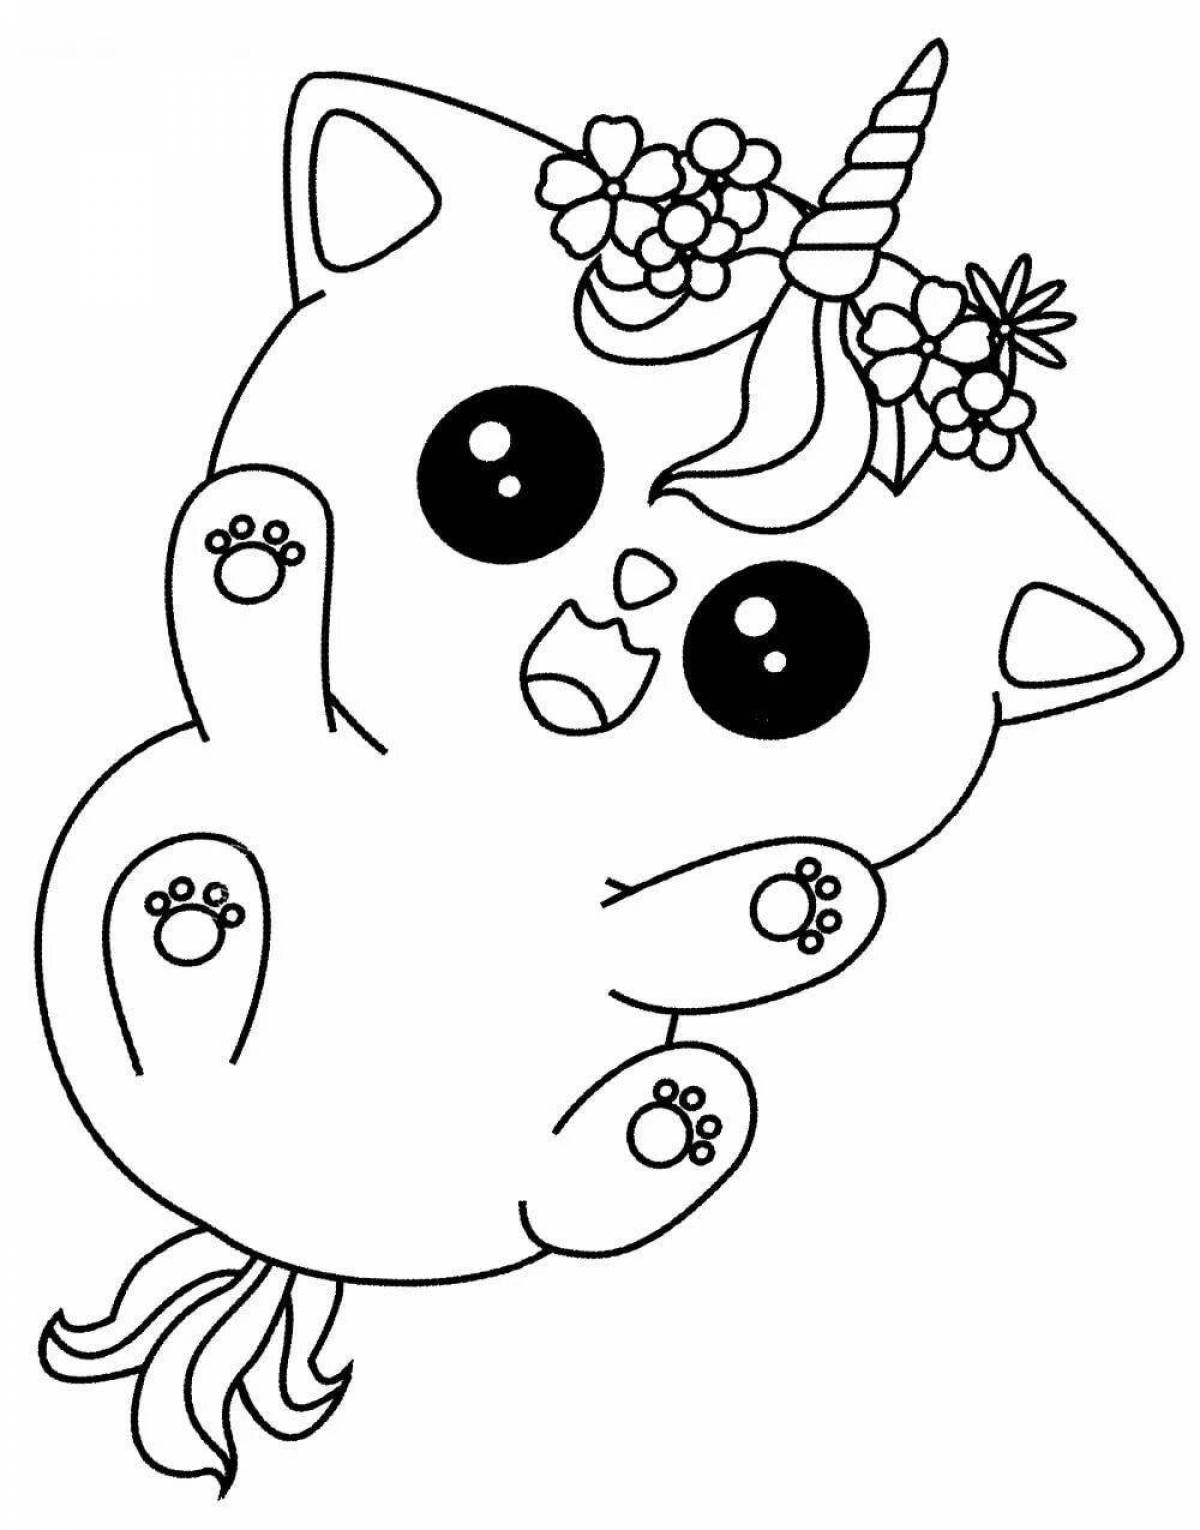 Felicity playful cat coloring page